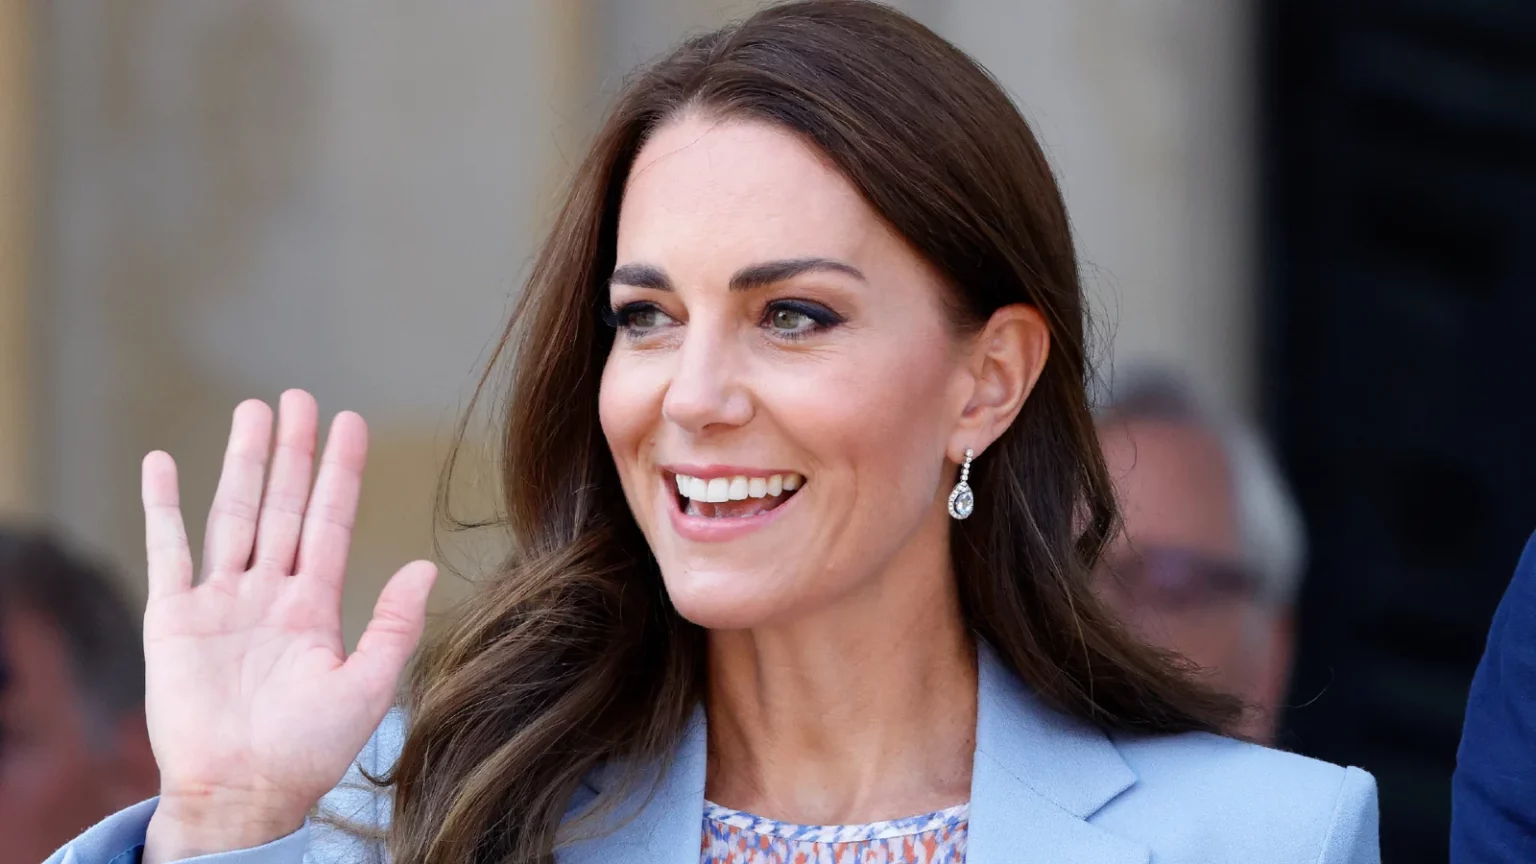 kate-middleton-exhibits-growing-confidence-says-expert